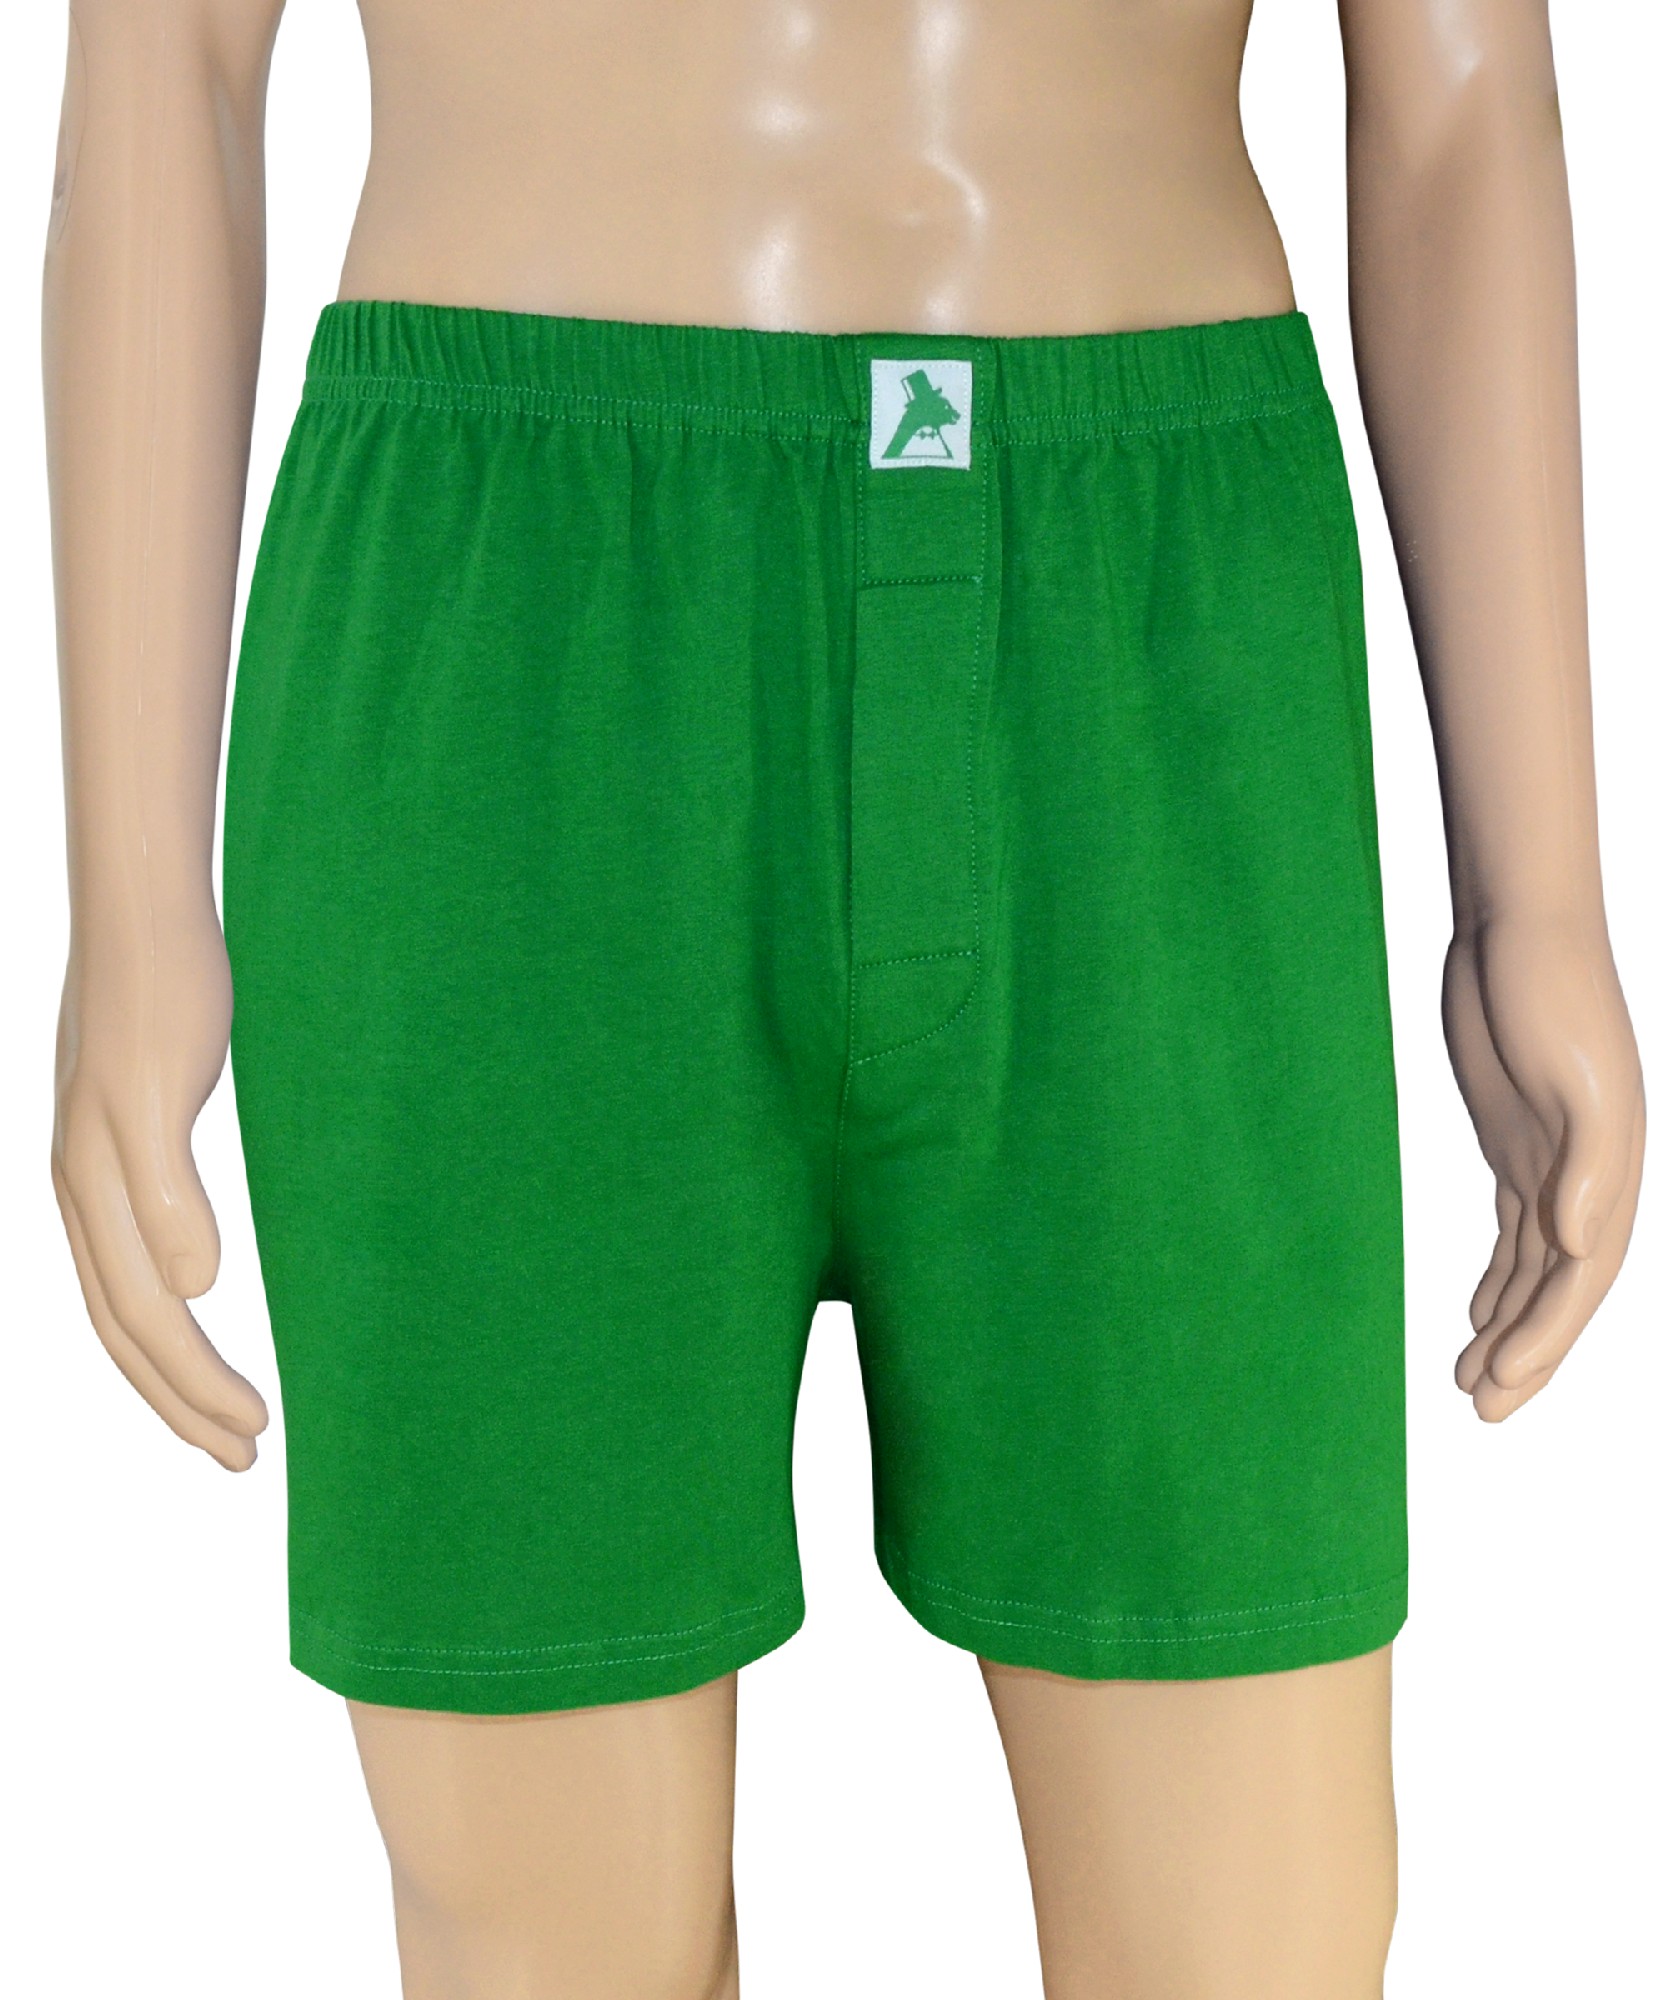 Biagio Mens Solid Emerald Green Color BOXER 100% Knit Cotton Shorts